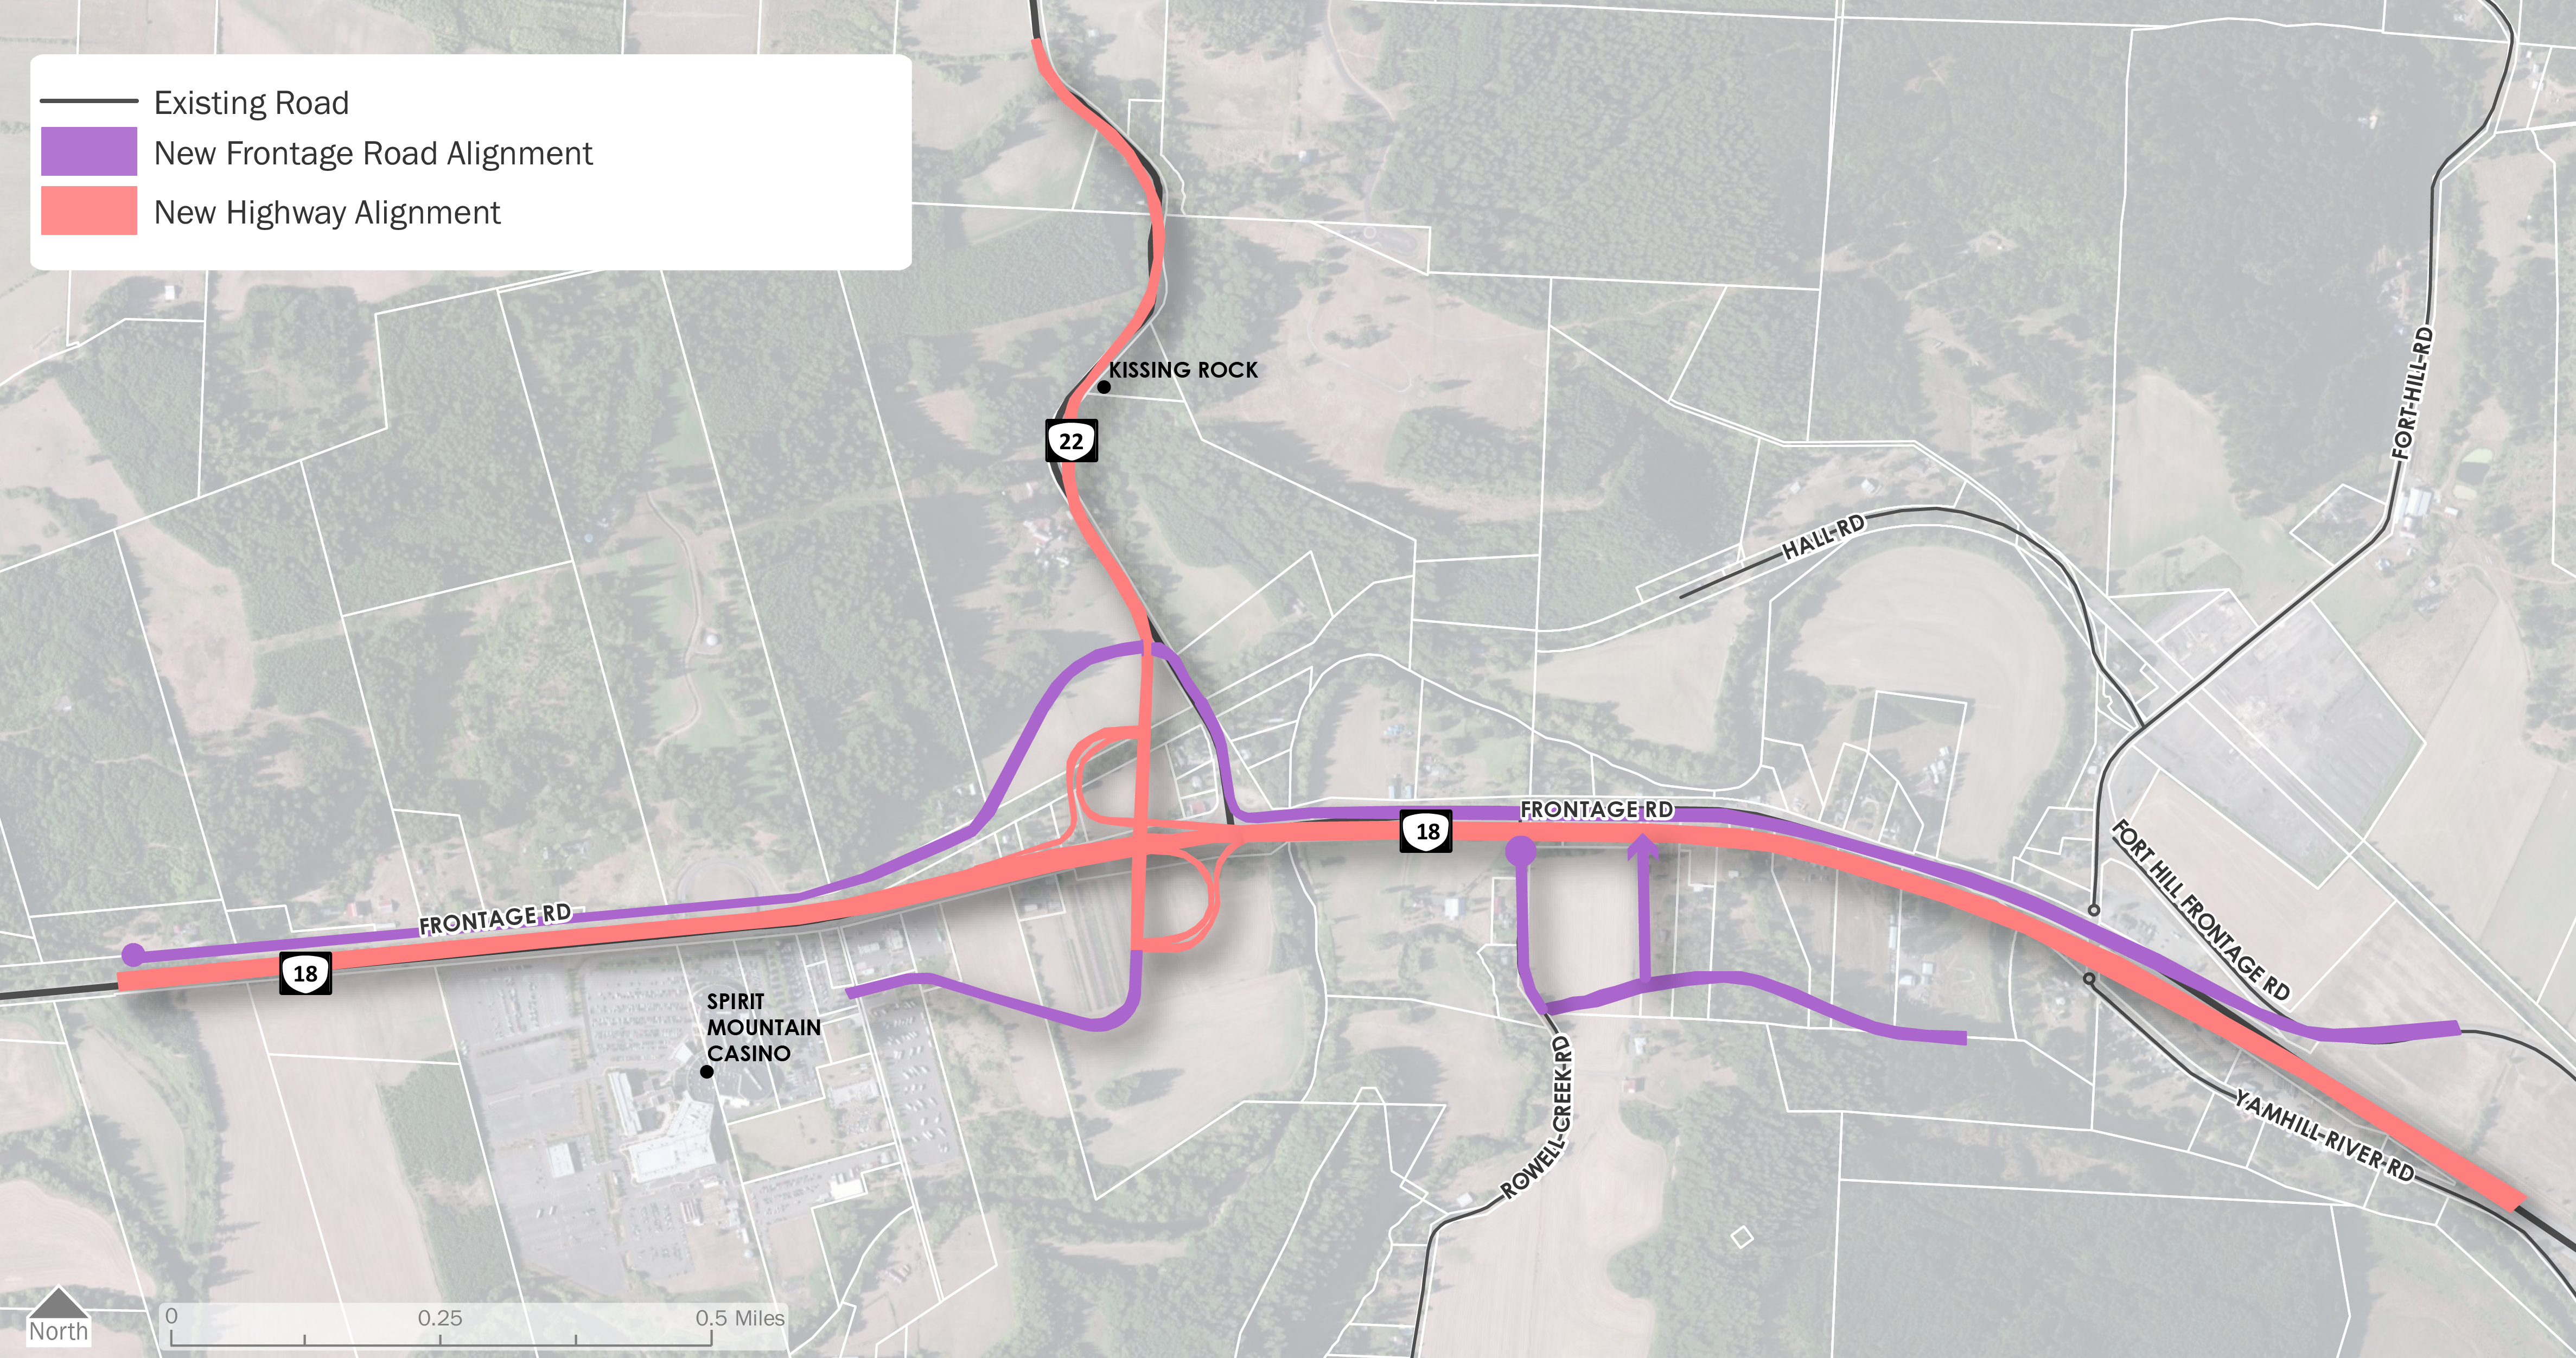 Map depicting the existing road with a purple line overlaid for the new frontage road alignment and an orange line overlaid depicting the new highway alignment